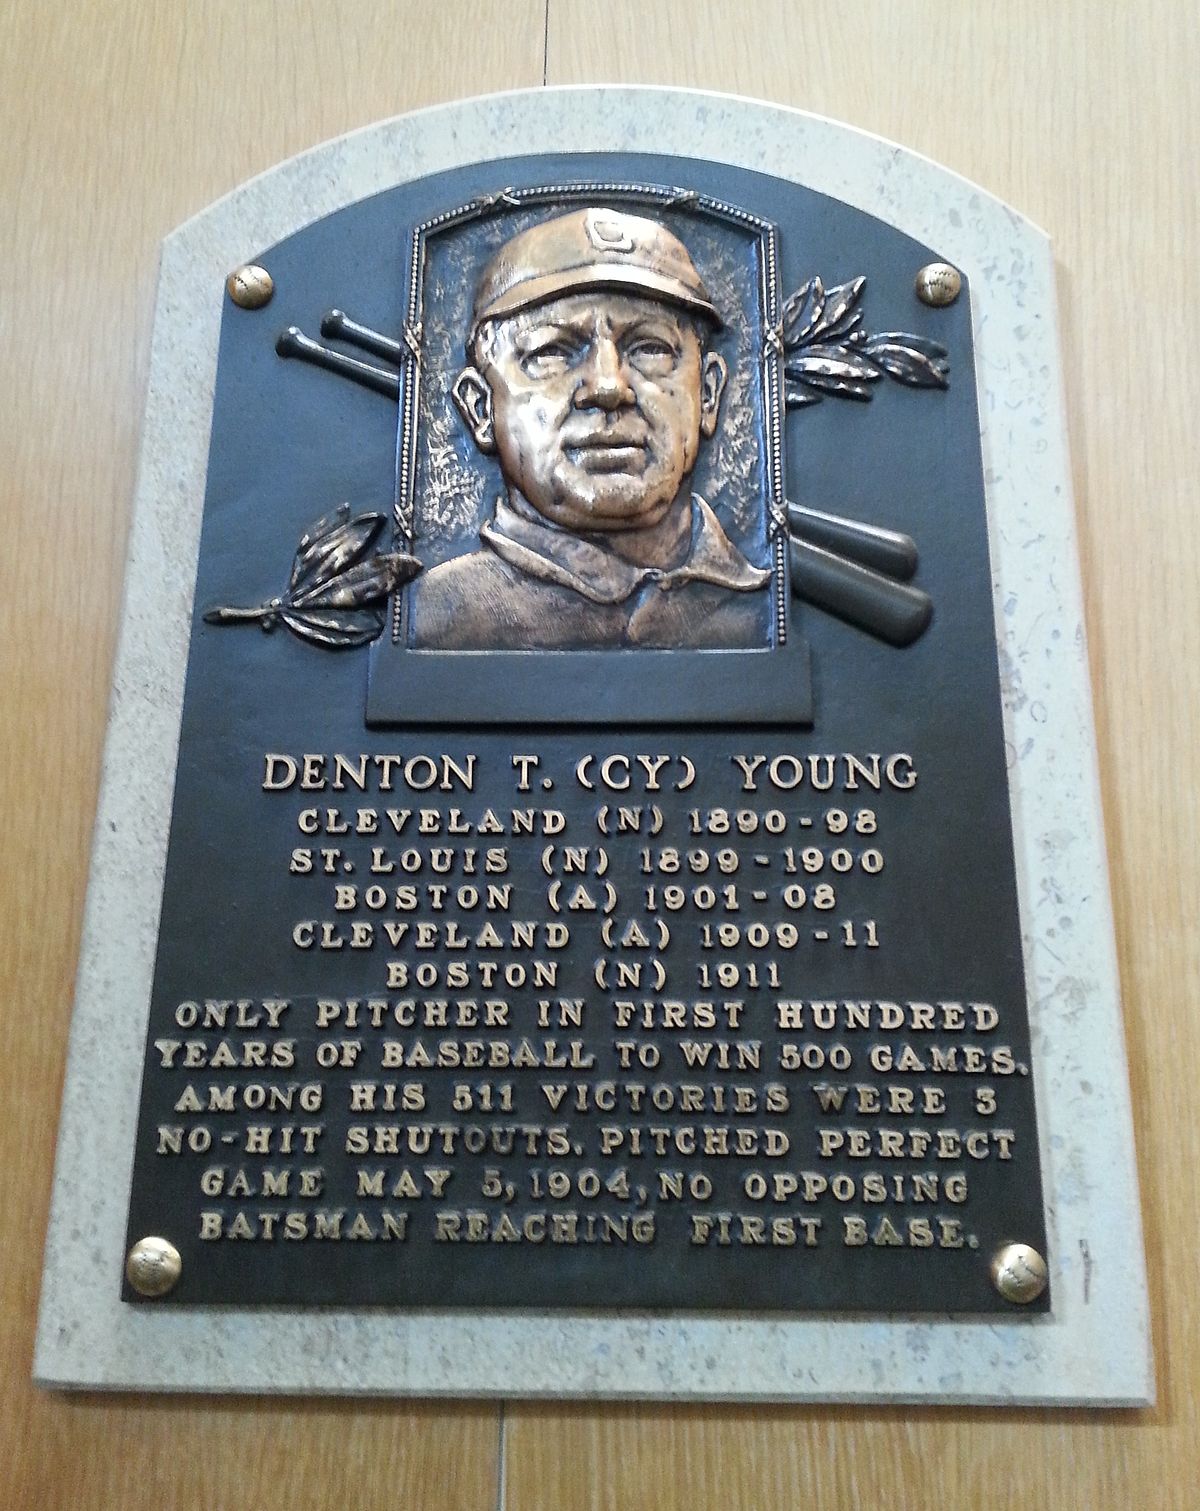 File:Cy Young HOF plaque.jpg - Wikipedia